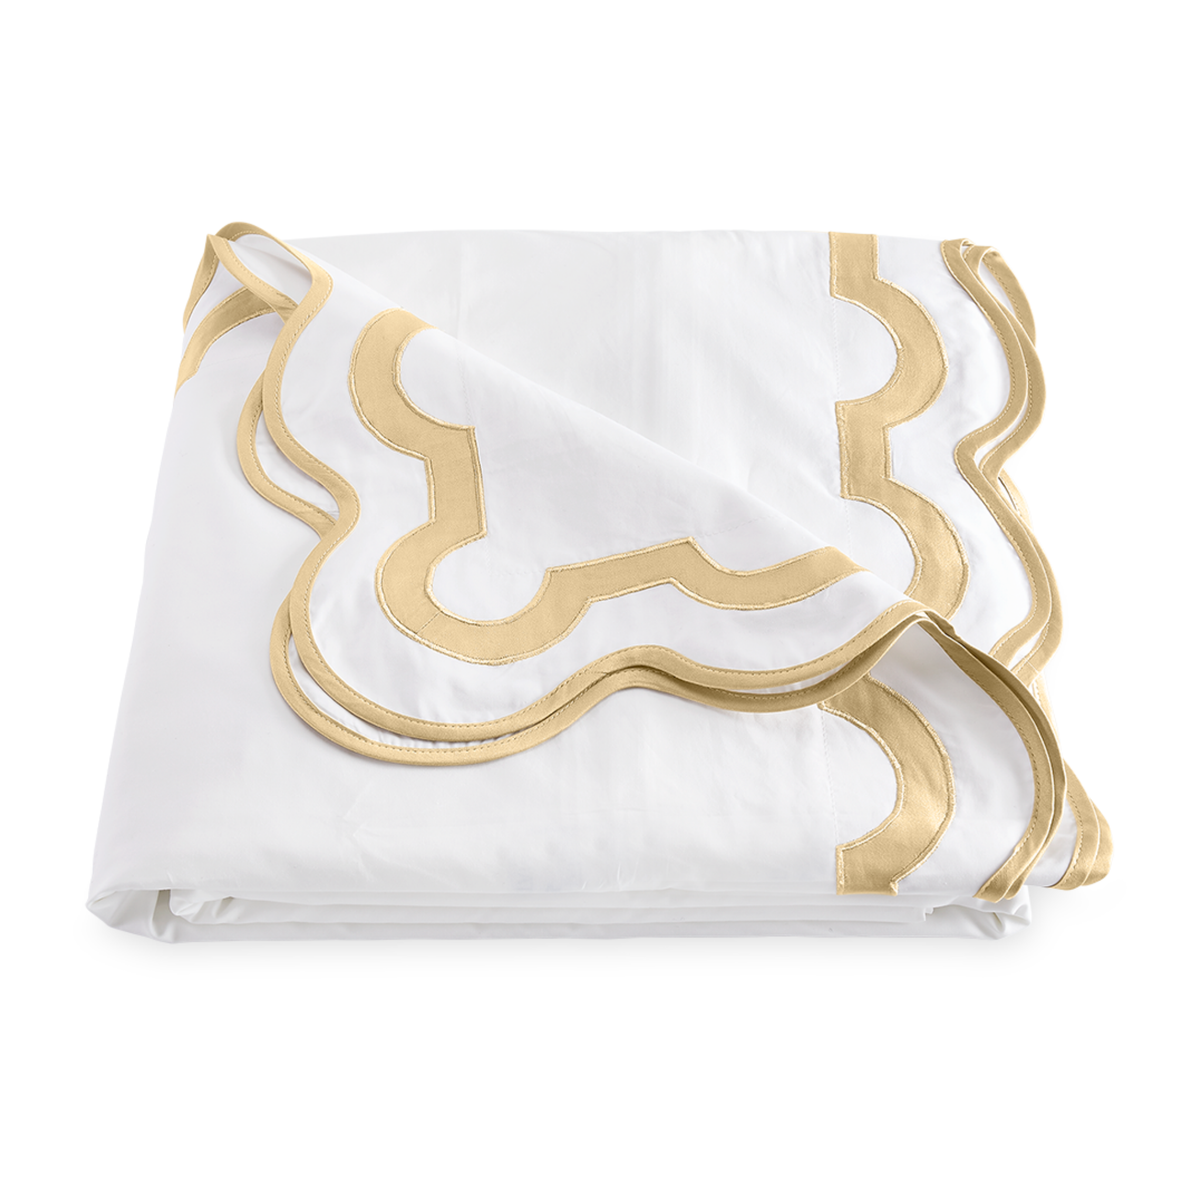 Folded Duvet Cover of Matouk Mirasol Collection in Champagne Color